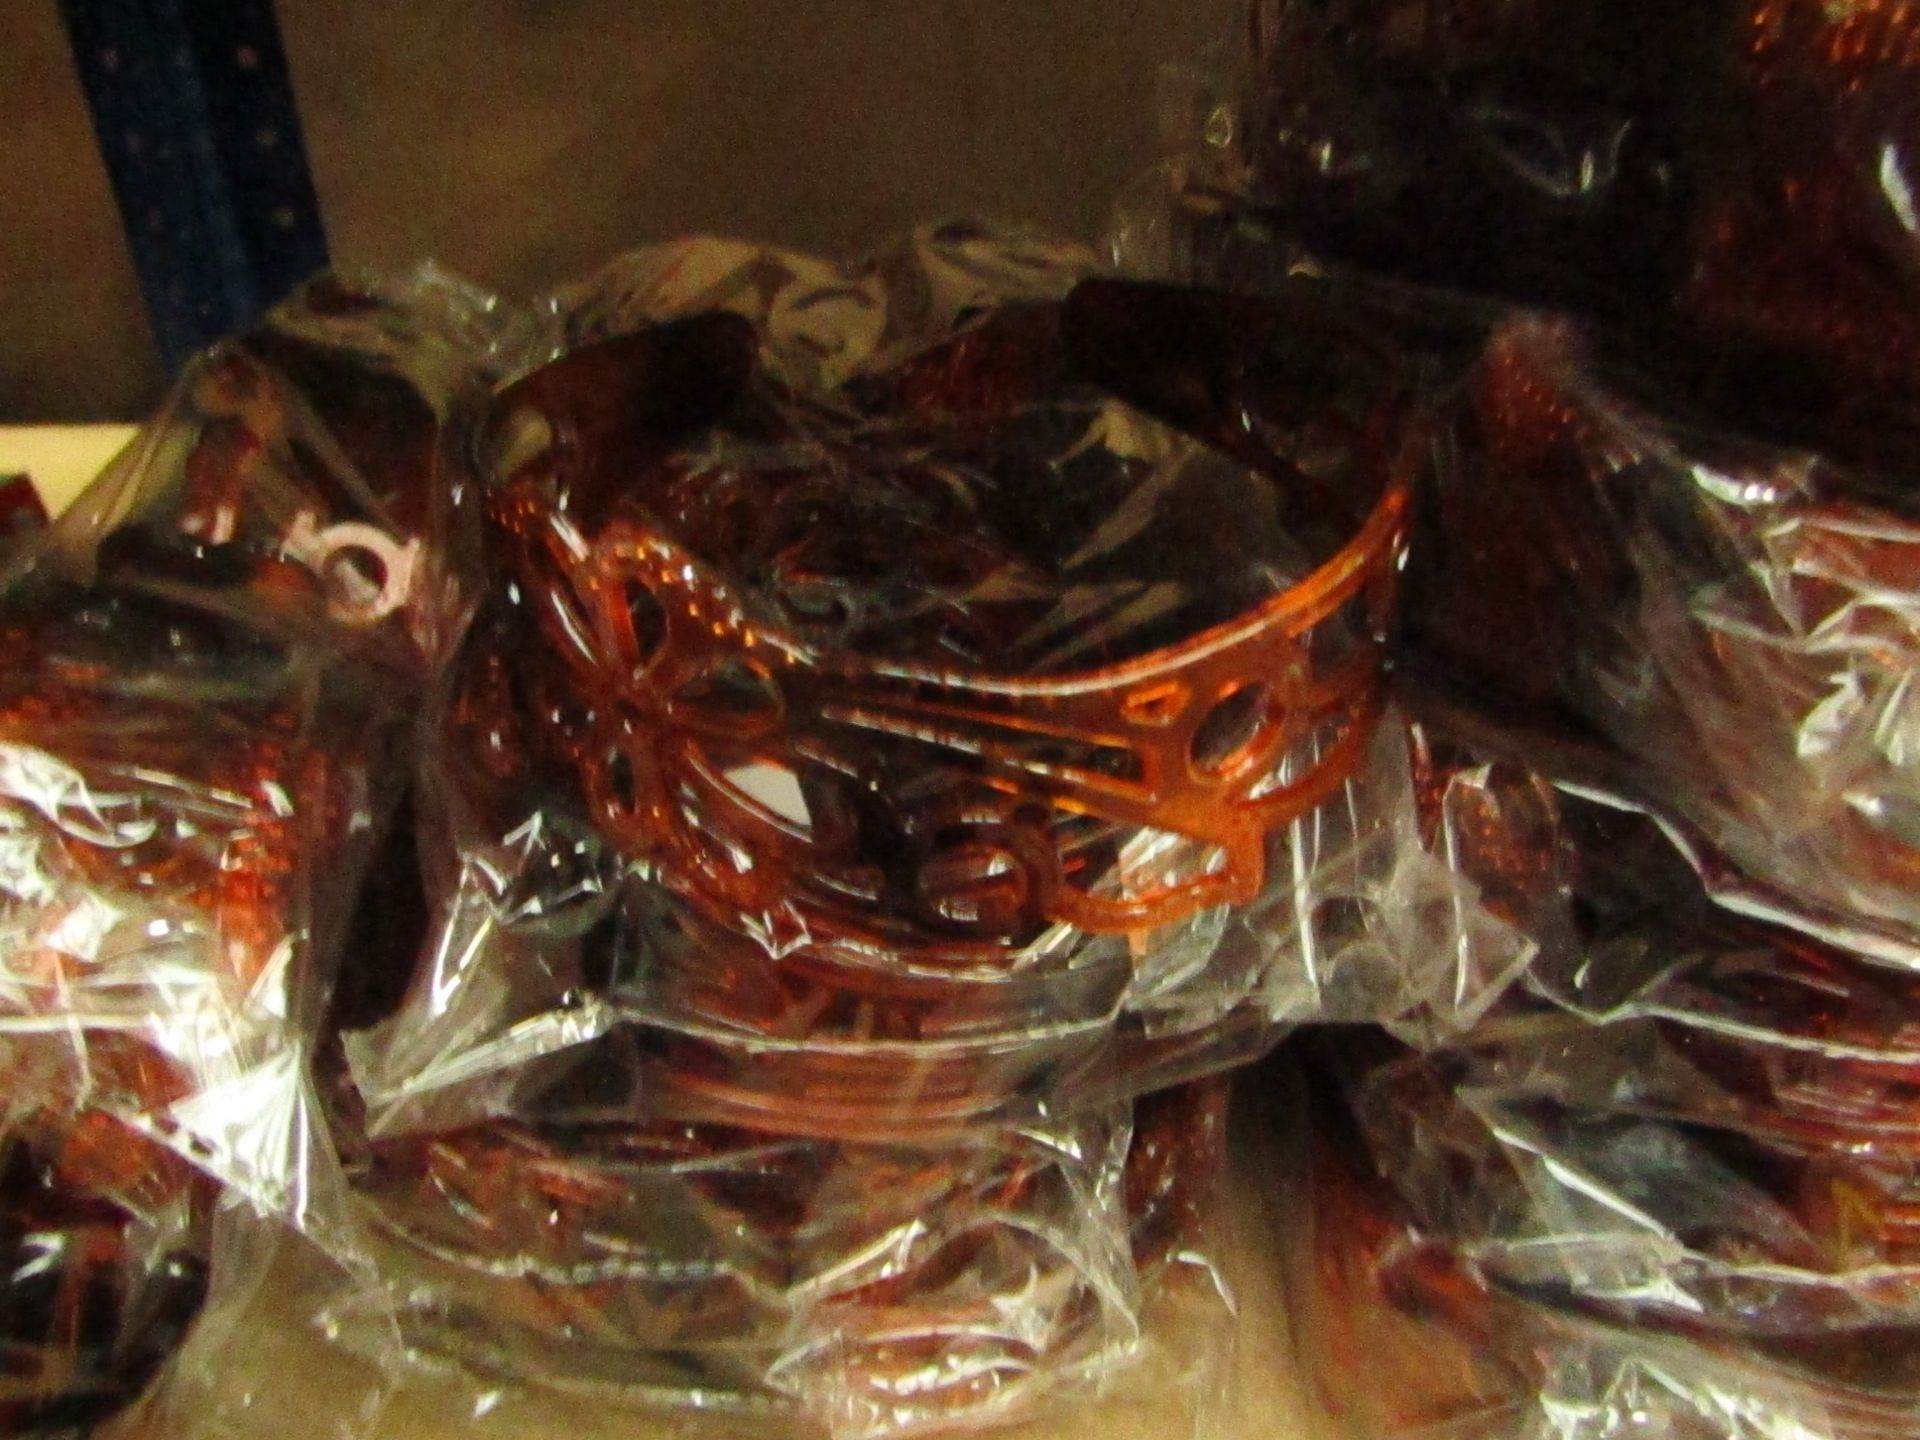 Pack of 12 Head-Bands - (brown) All packaged. - See Image.